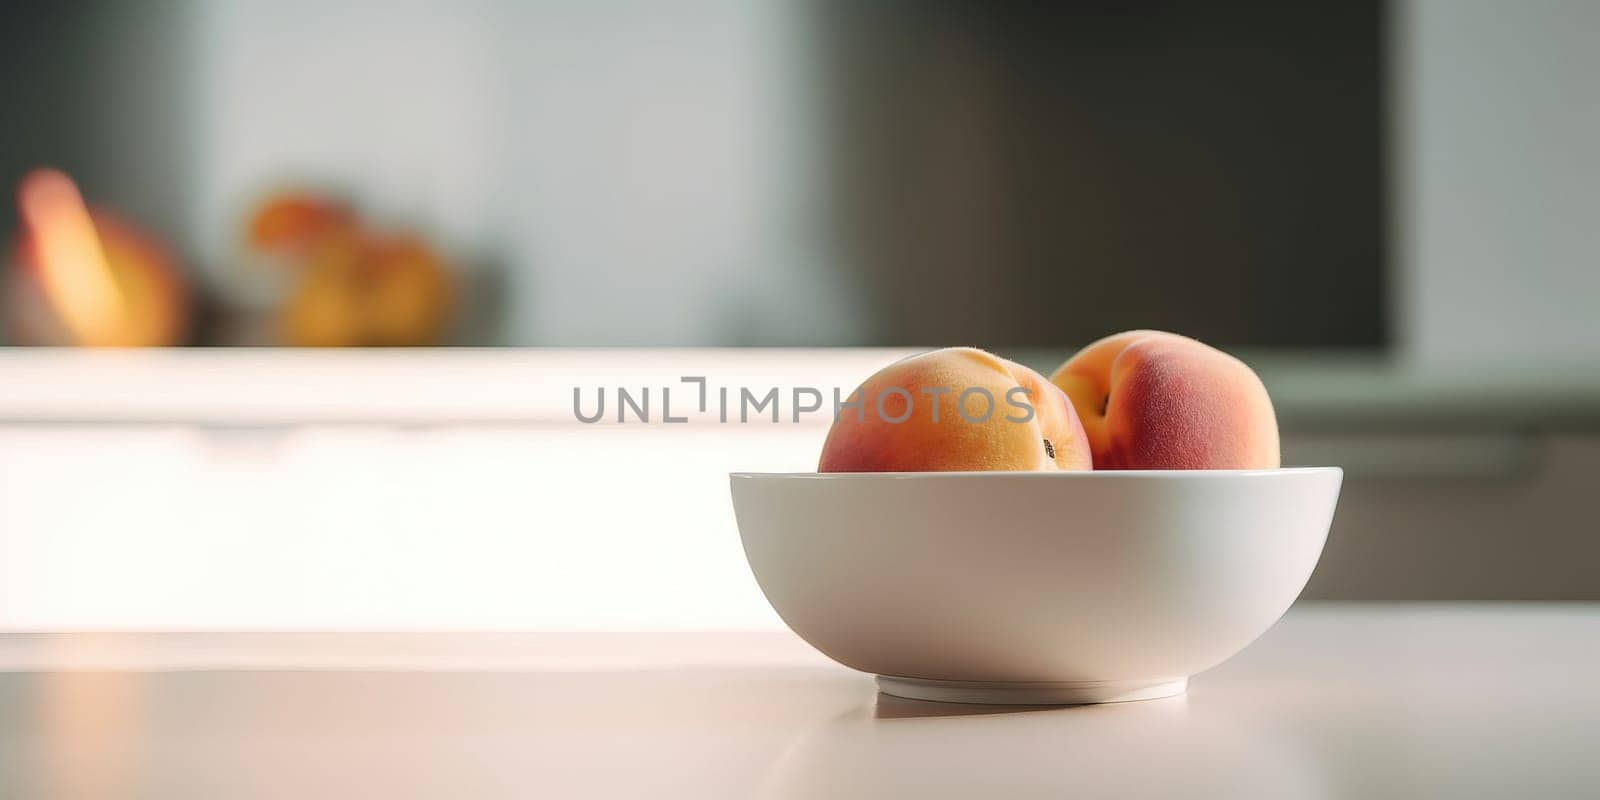 Peaches in a bowl on the kitchen table by GekaSkr